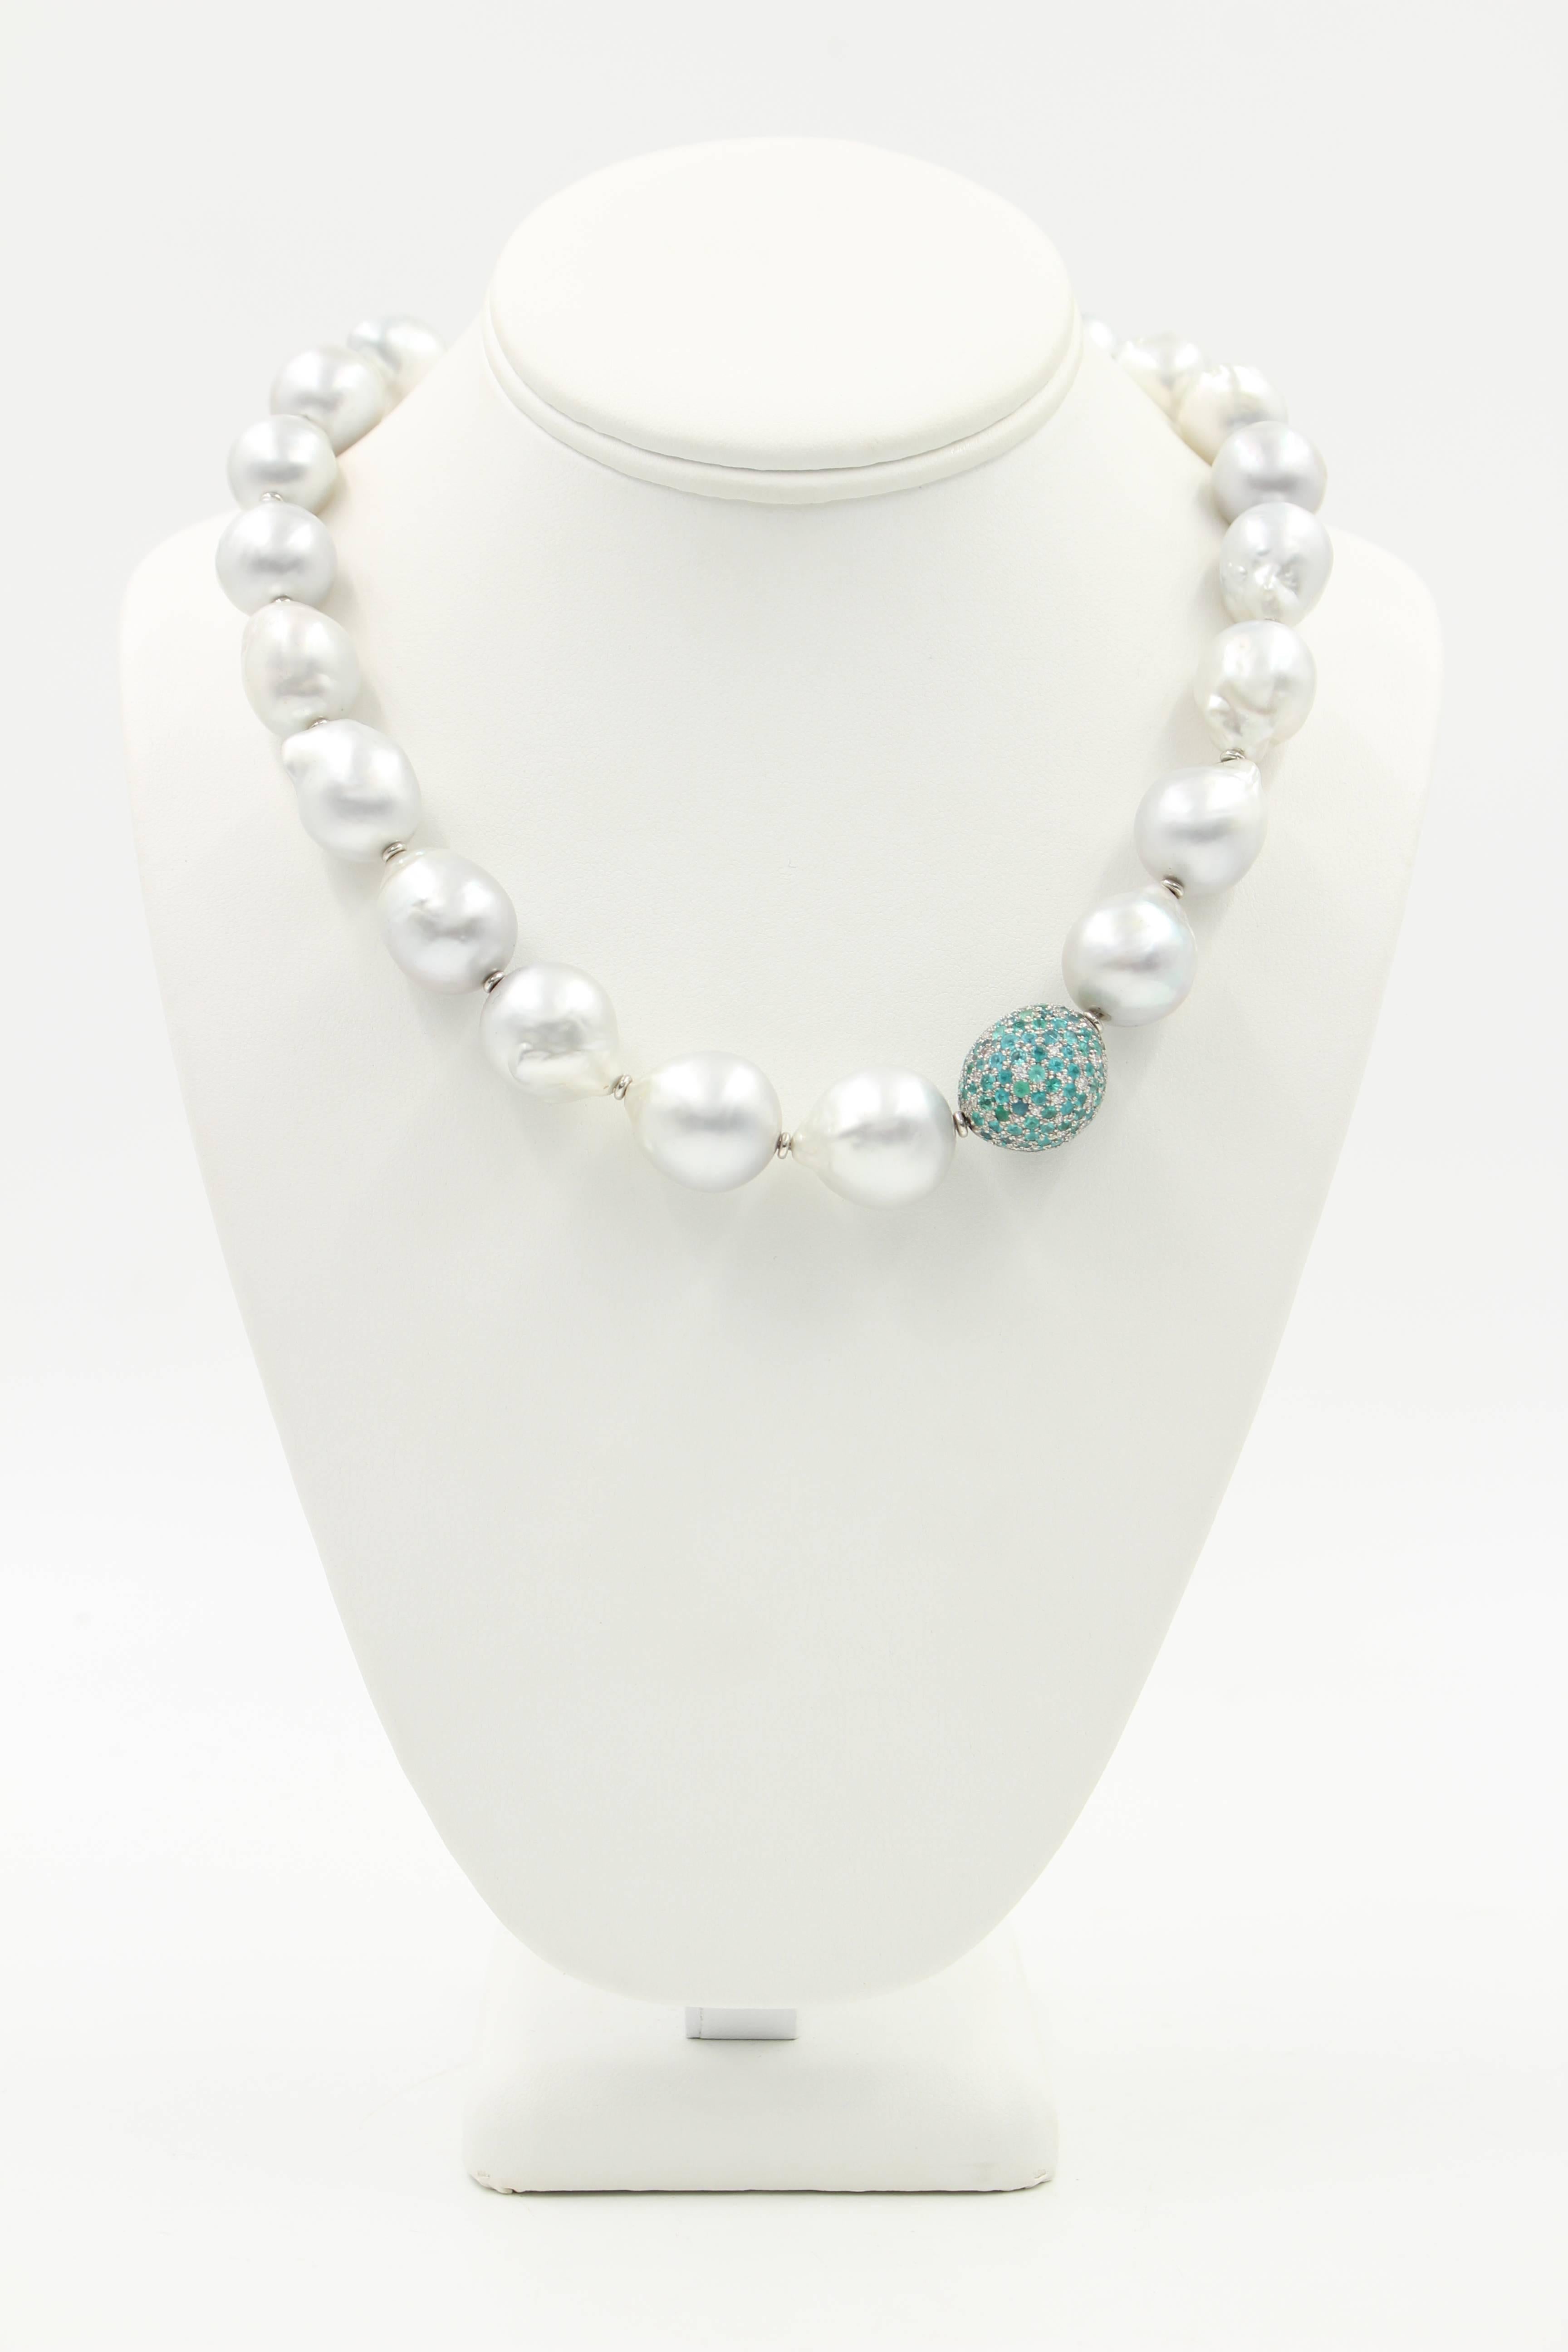 Women's The Spectacular Necklace with South Sea Pearls, Paraiba Tourmalines, Diamonds For Sale